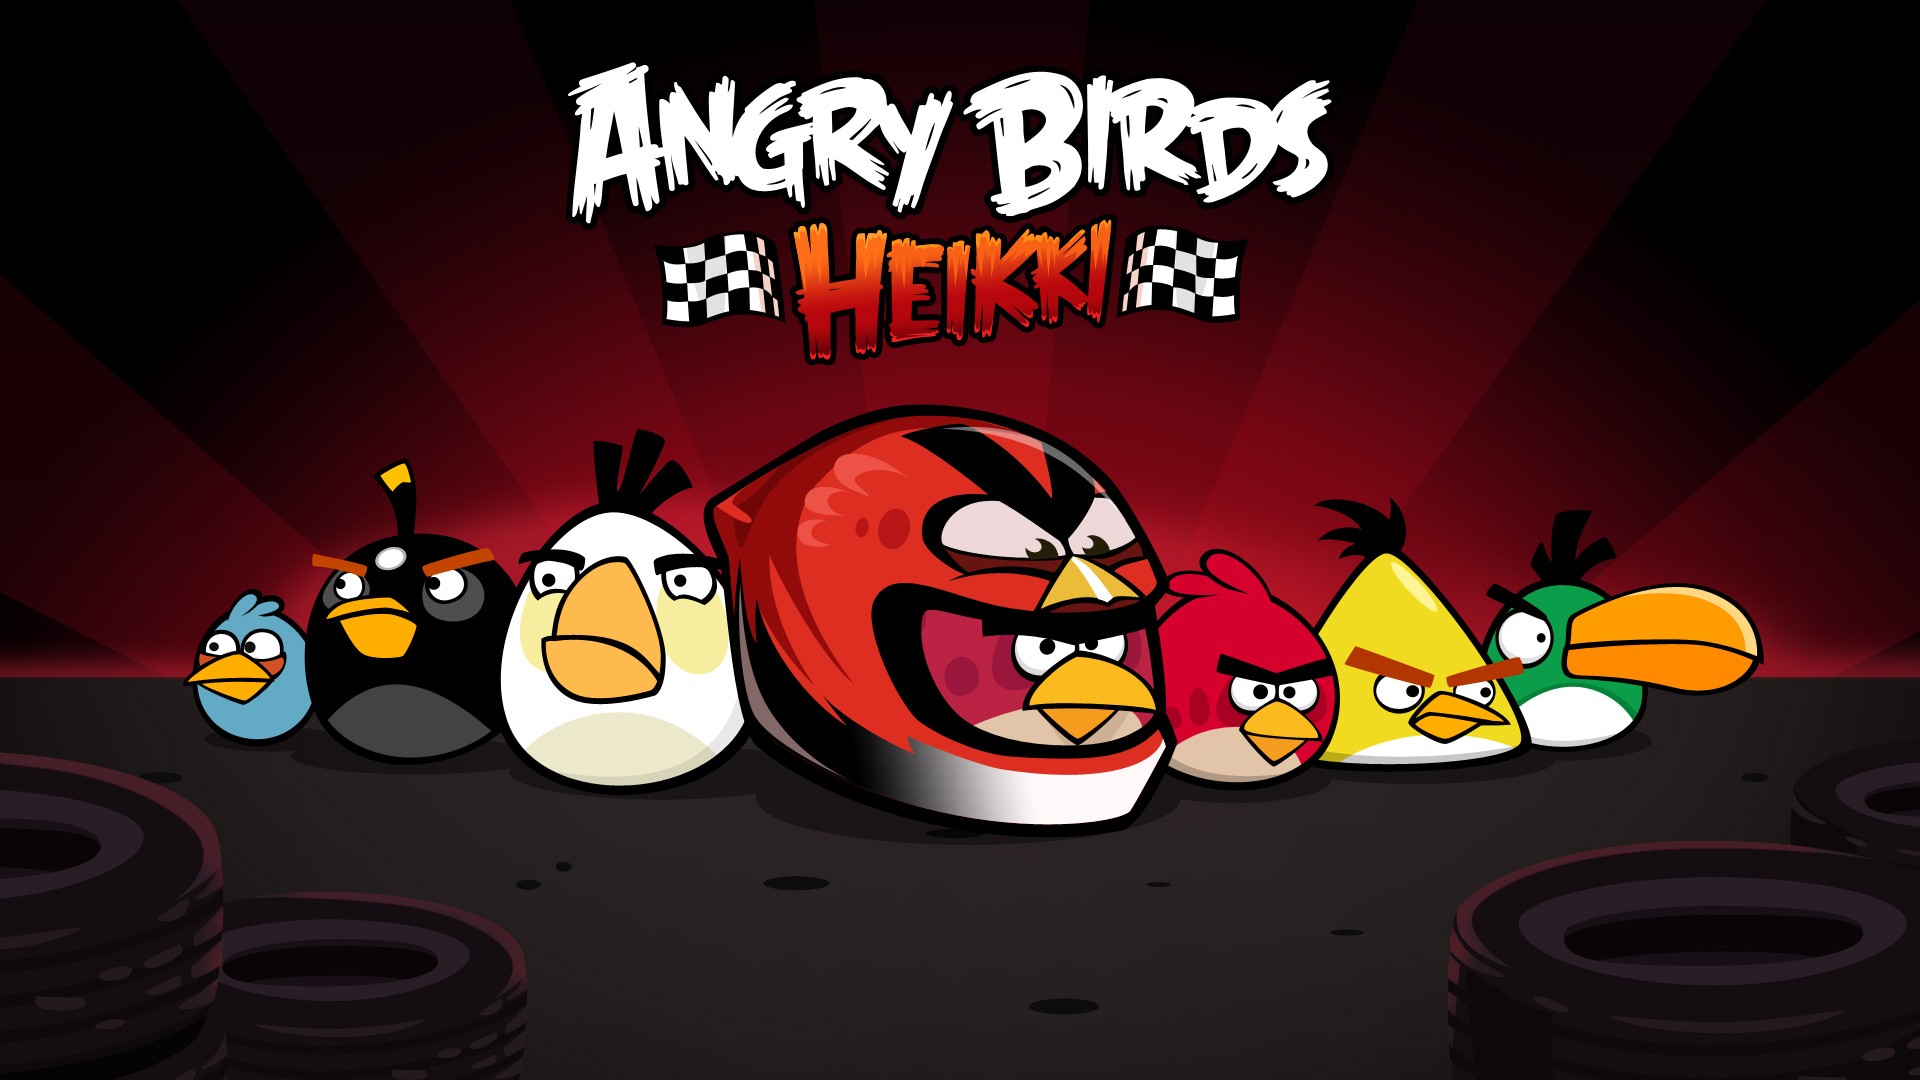 20 Best HD Angry Birds Wallpapers   DezineGuide